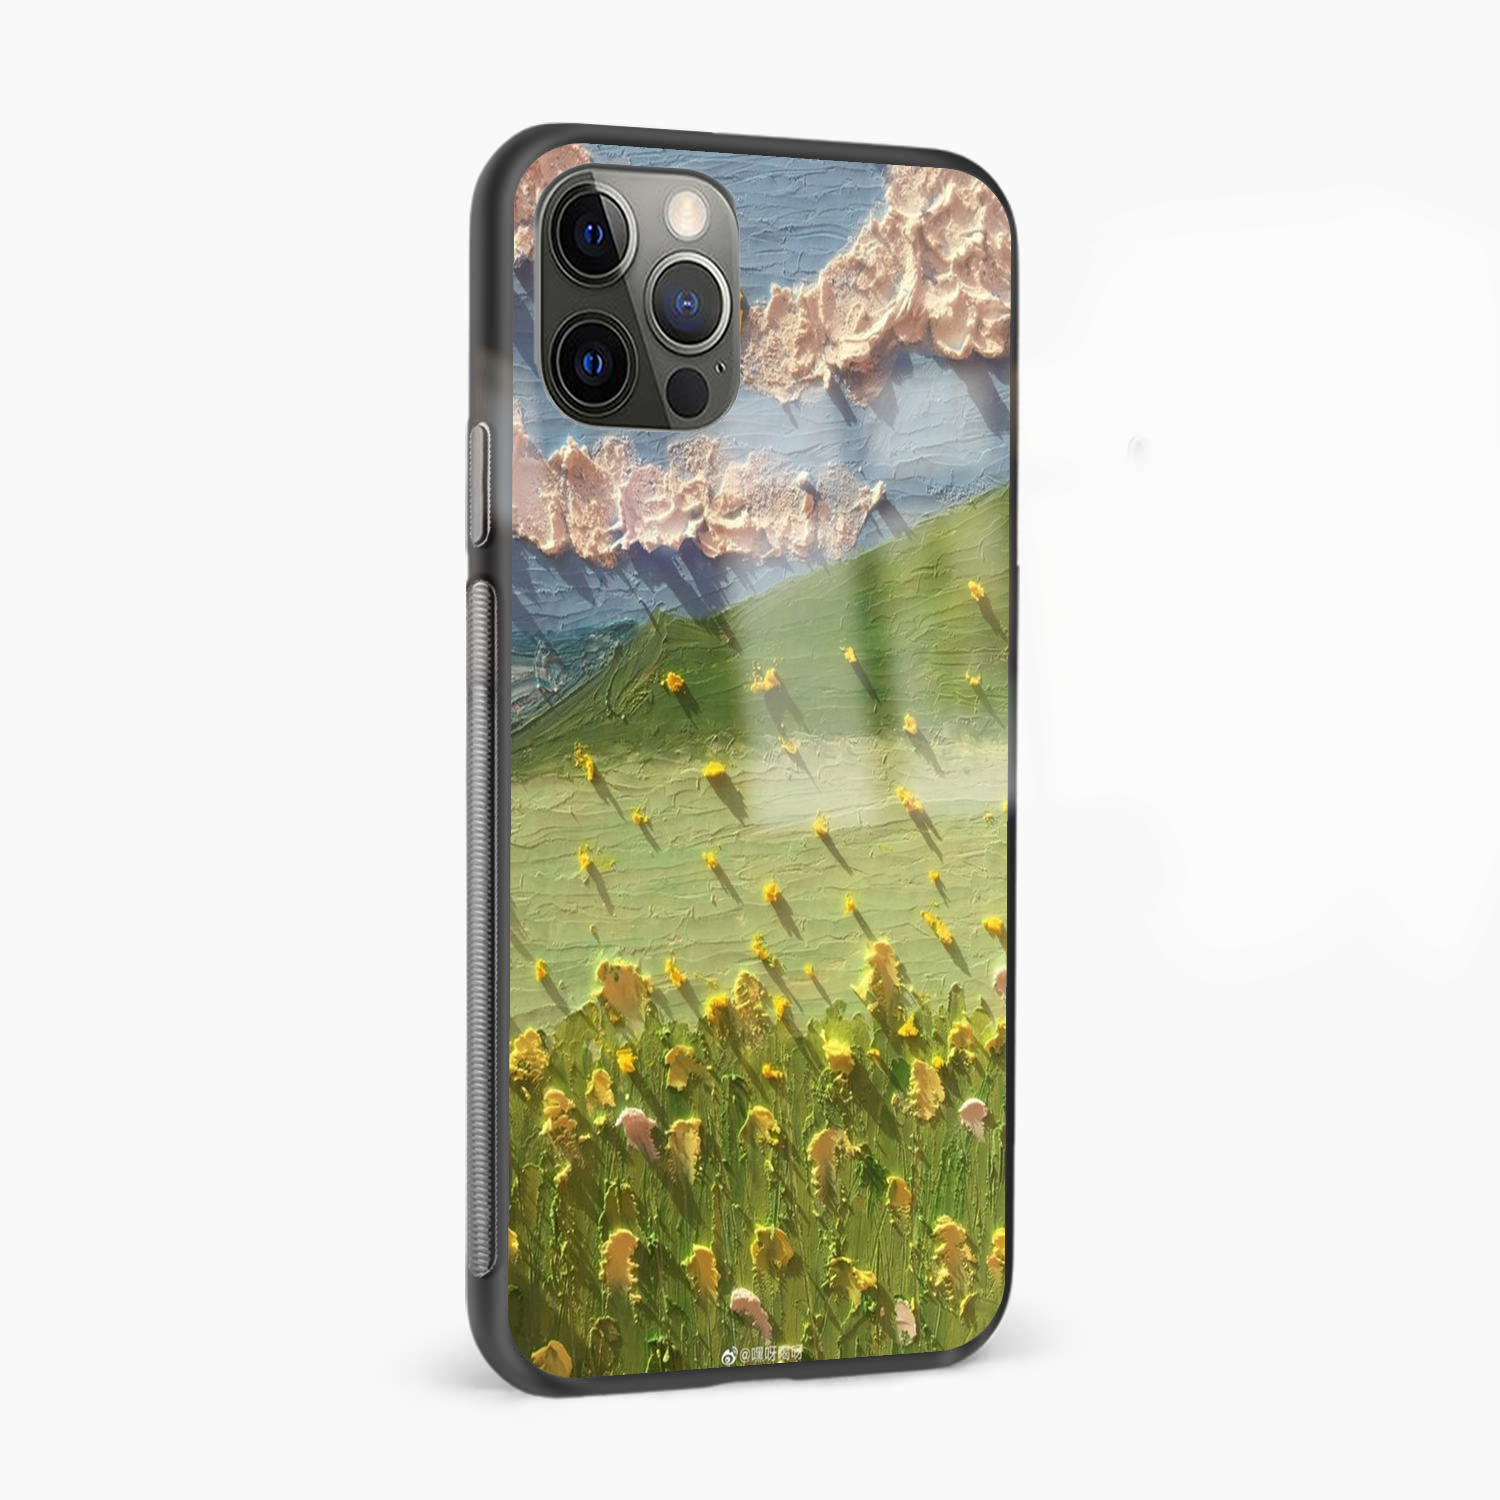 Grass Field Art Abstract Glass Phone Case Cover - Aesthetic Phone Covers - Culltique